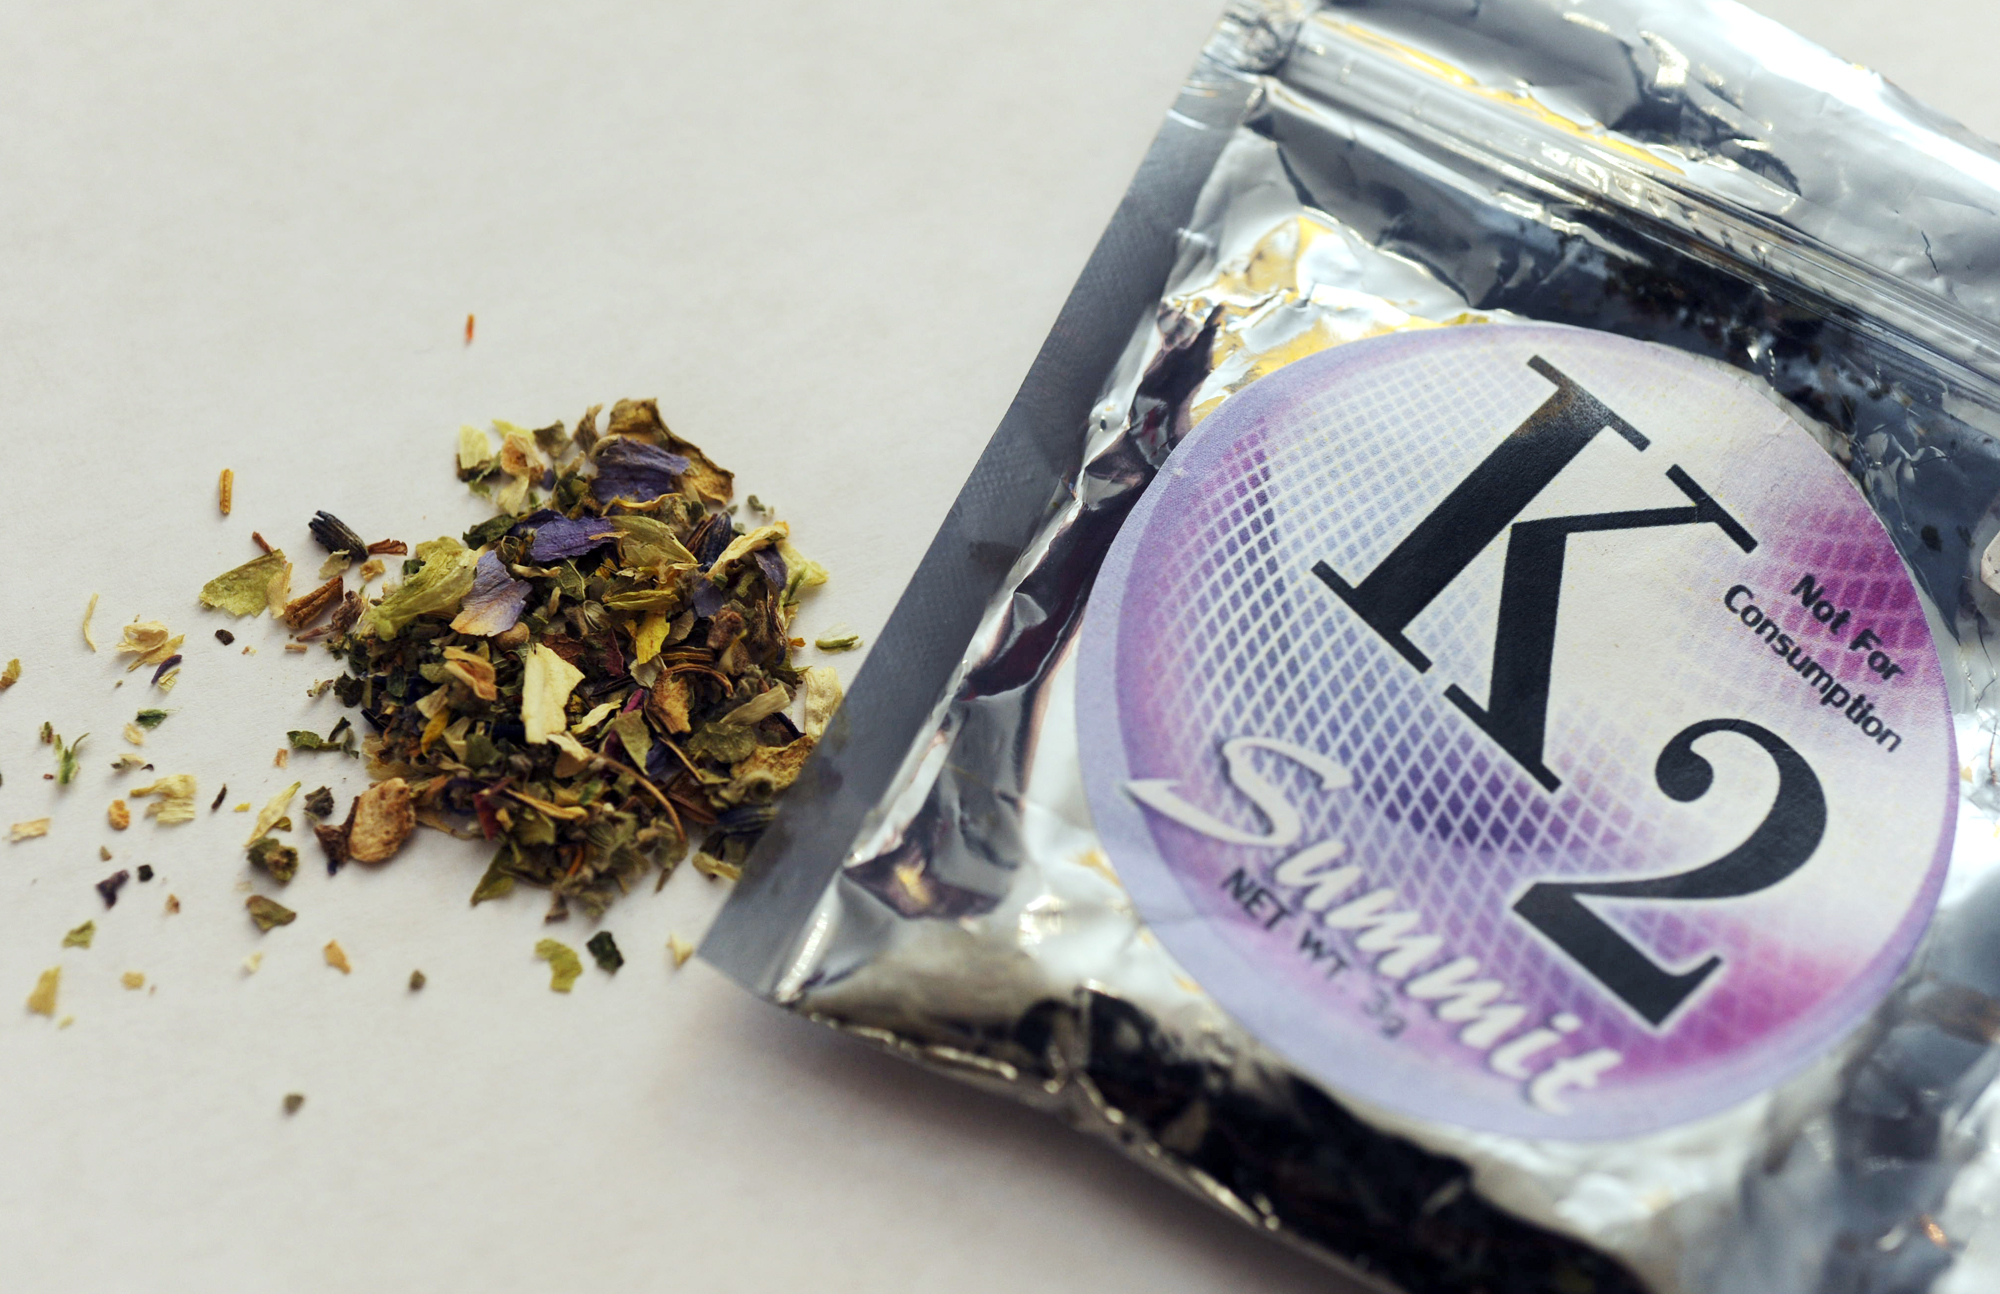 Over 2 dozen people rushed to hospital after taking synthetic weed - ABC  News